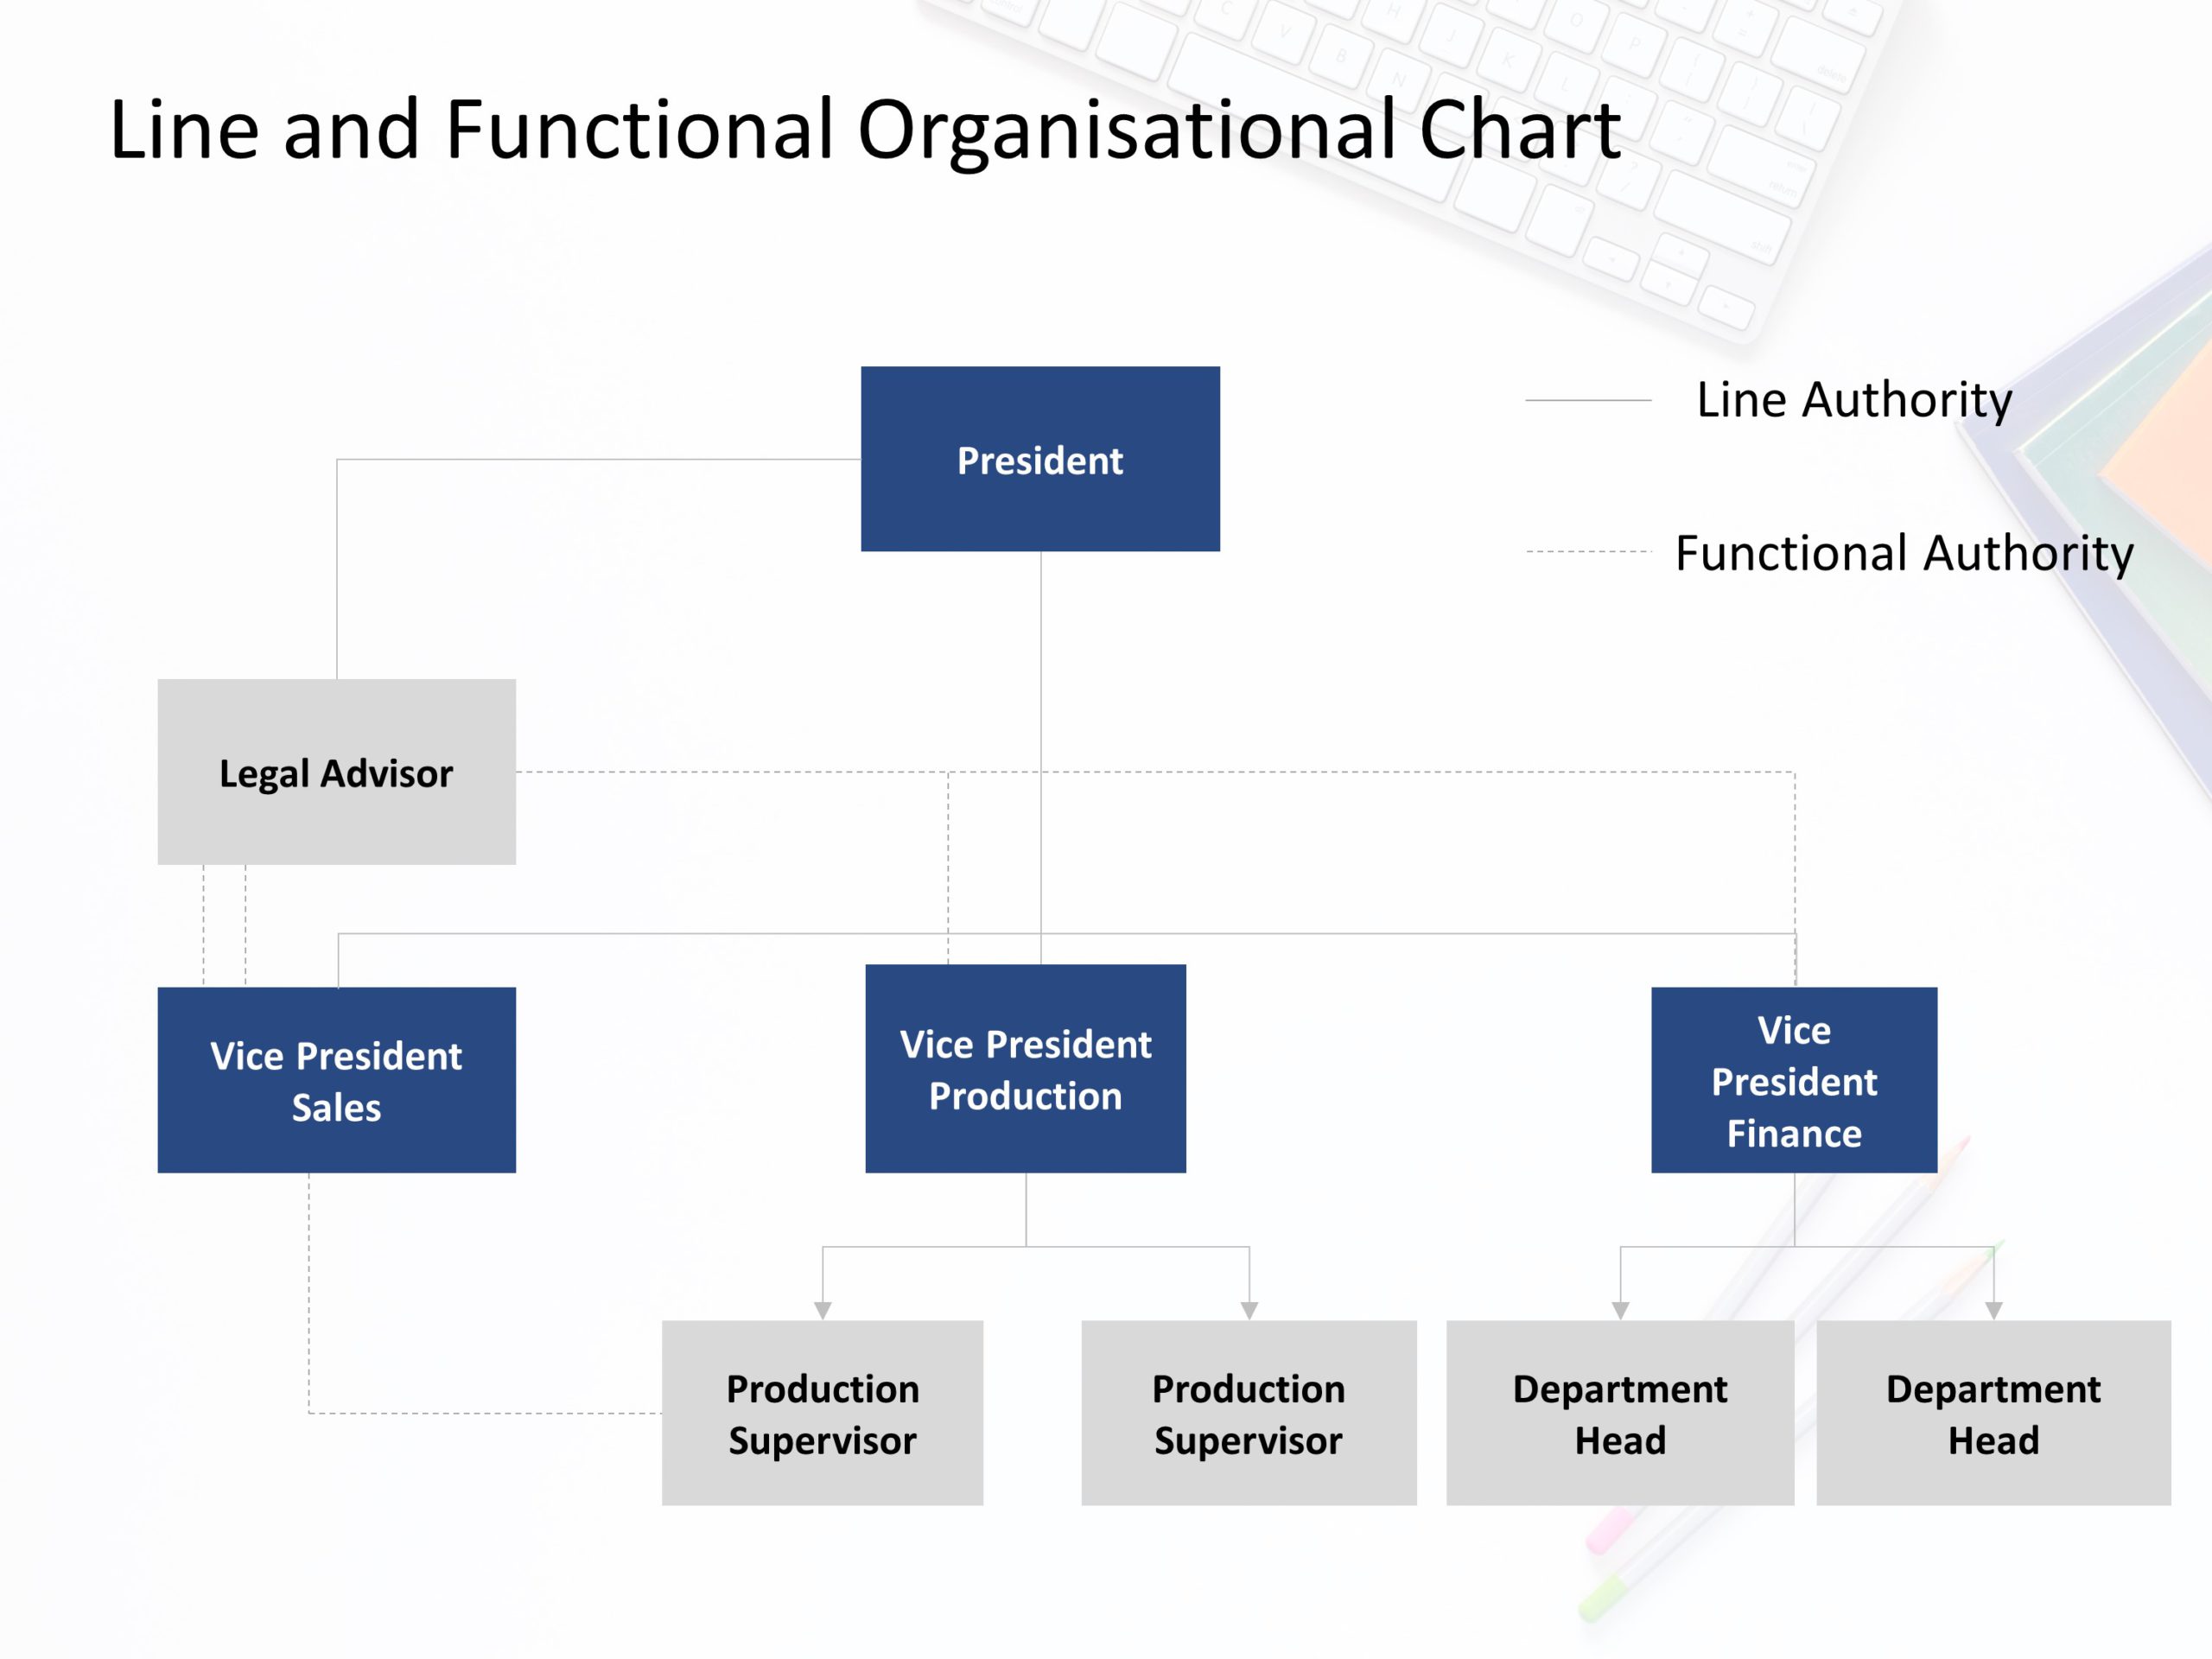 Line and Functional Organization Structure PowerPoint Template